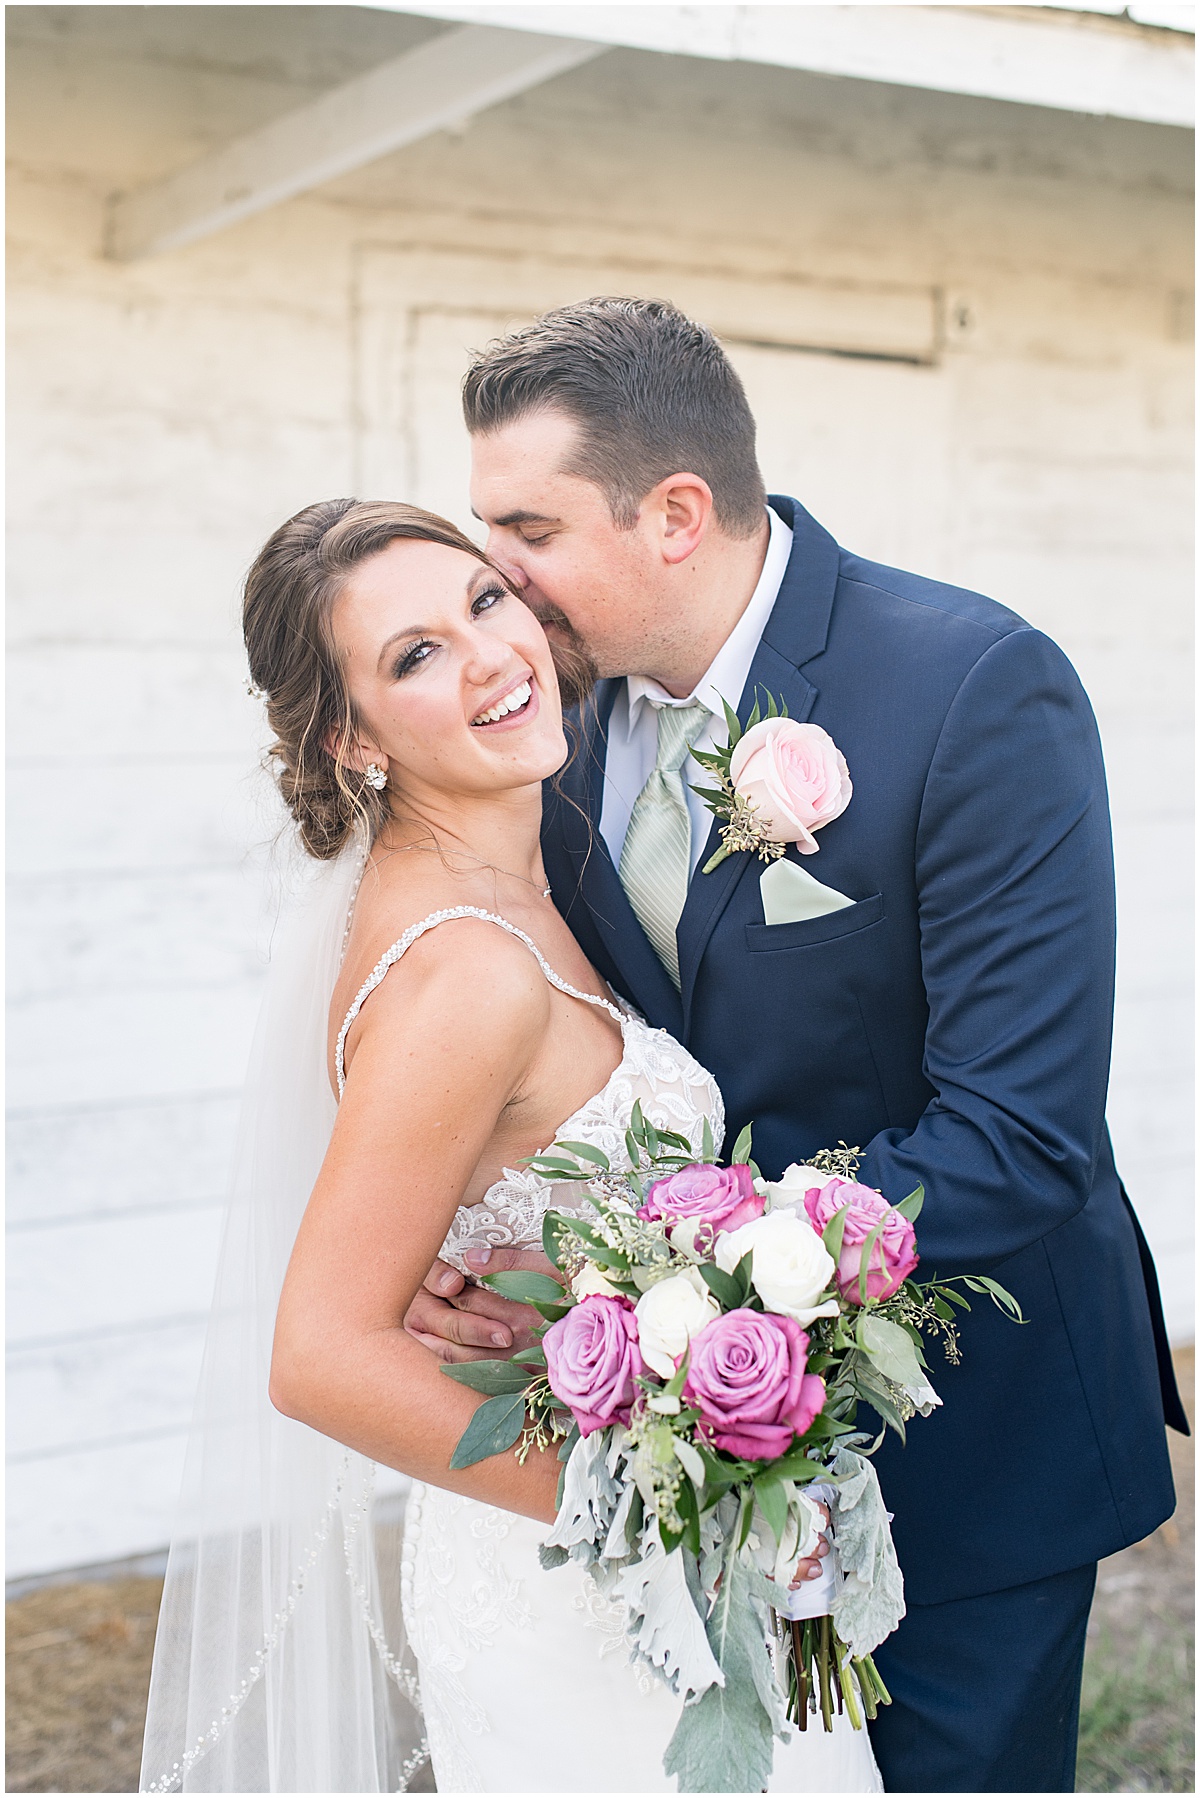 Bride and groom just married photos in Rensselaer, Indiana at the Jasper County fairgrounds